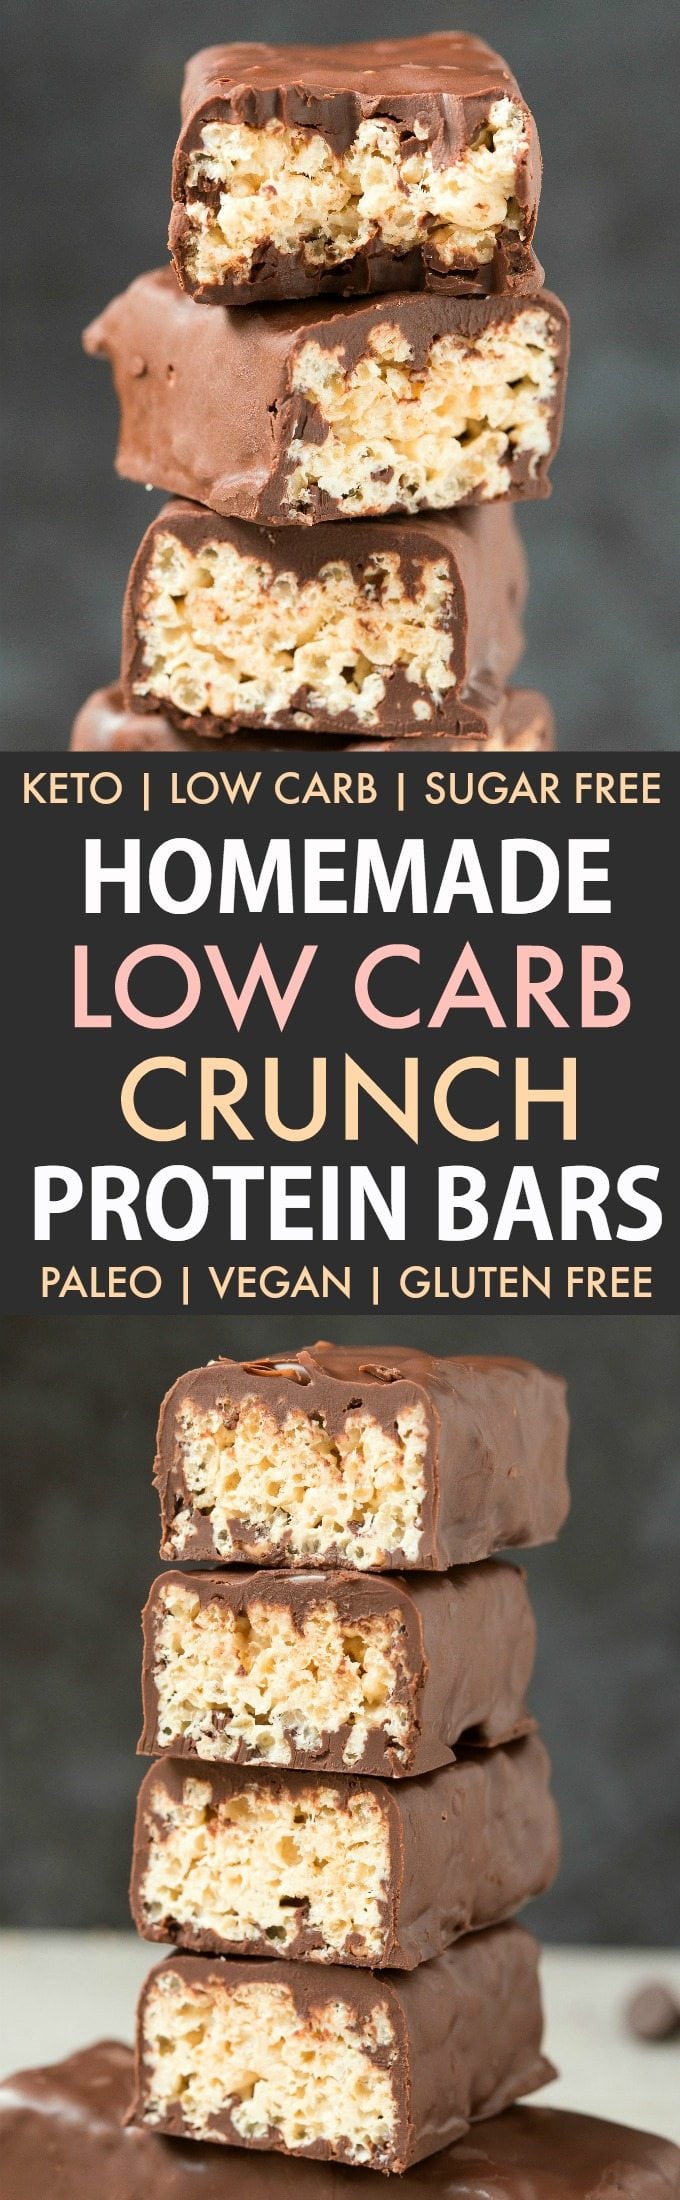 Homemade Low Carb CRUNCH Protein Bars in a collage